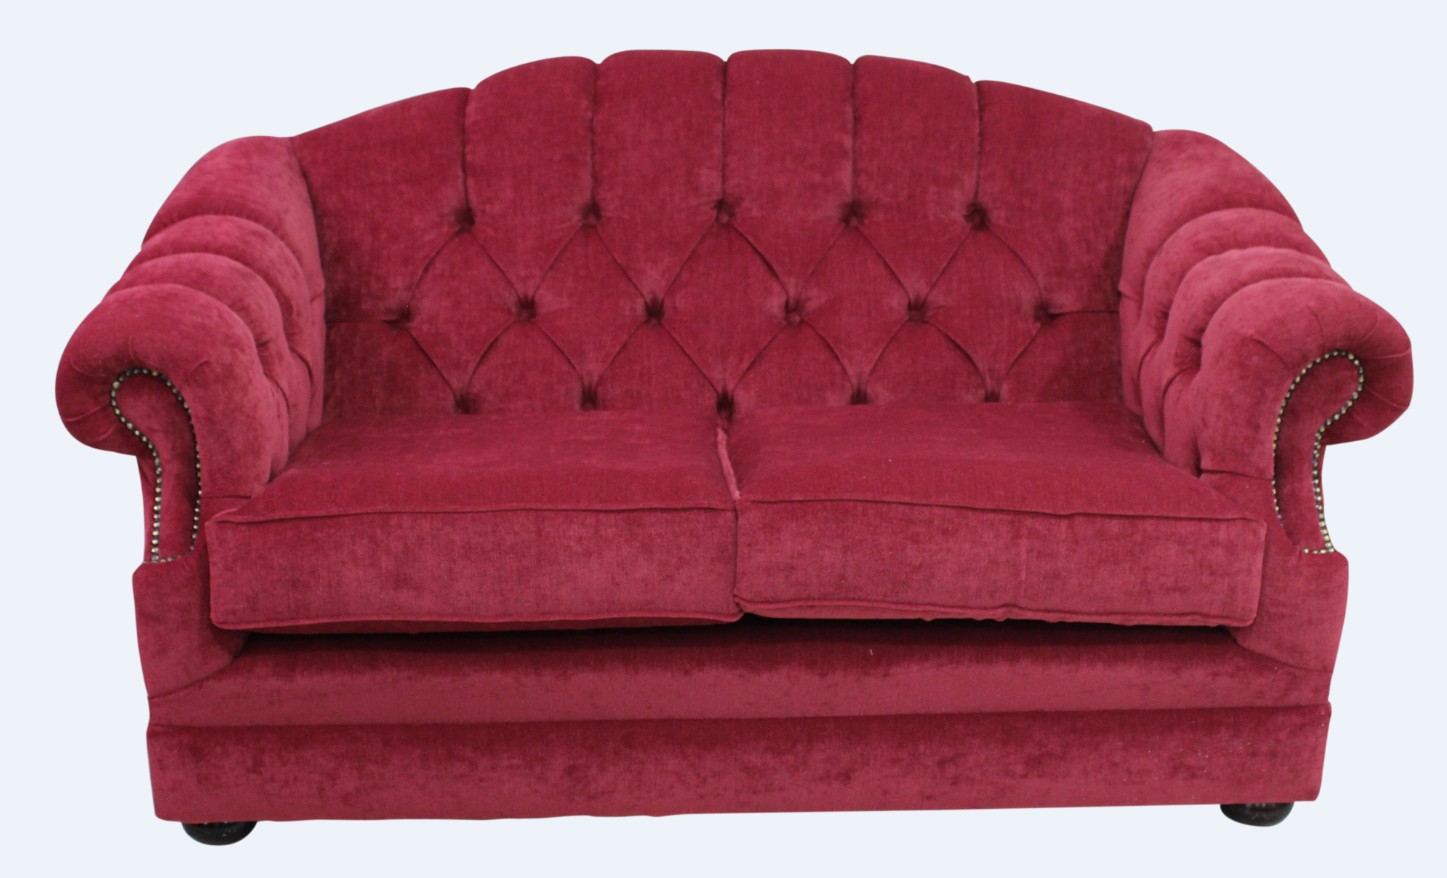 Crafting Timeless Elegance The Origin and Excellence of Chesterfield Sofas  %Post Title